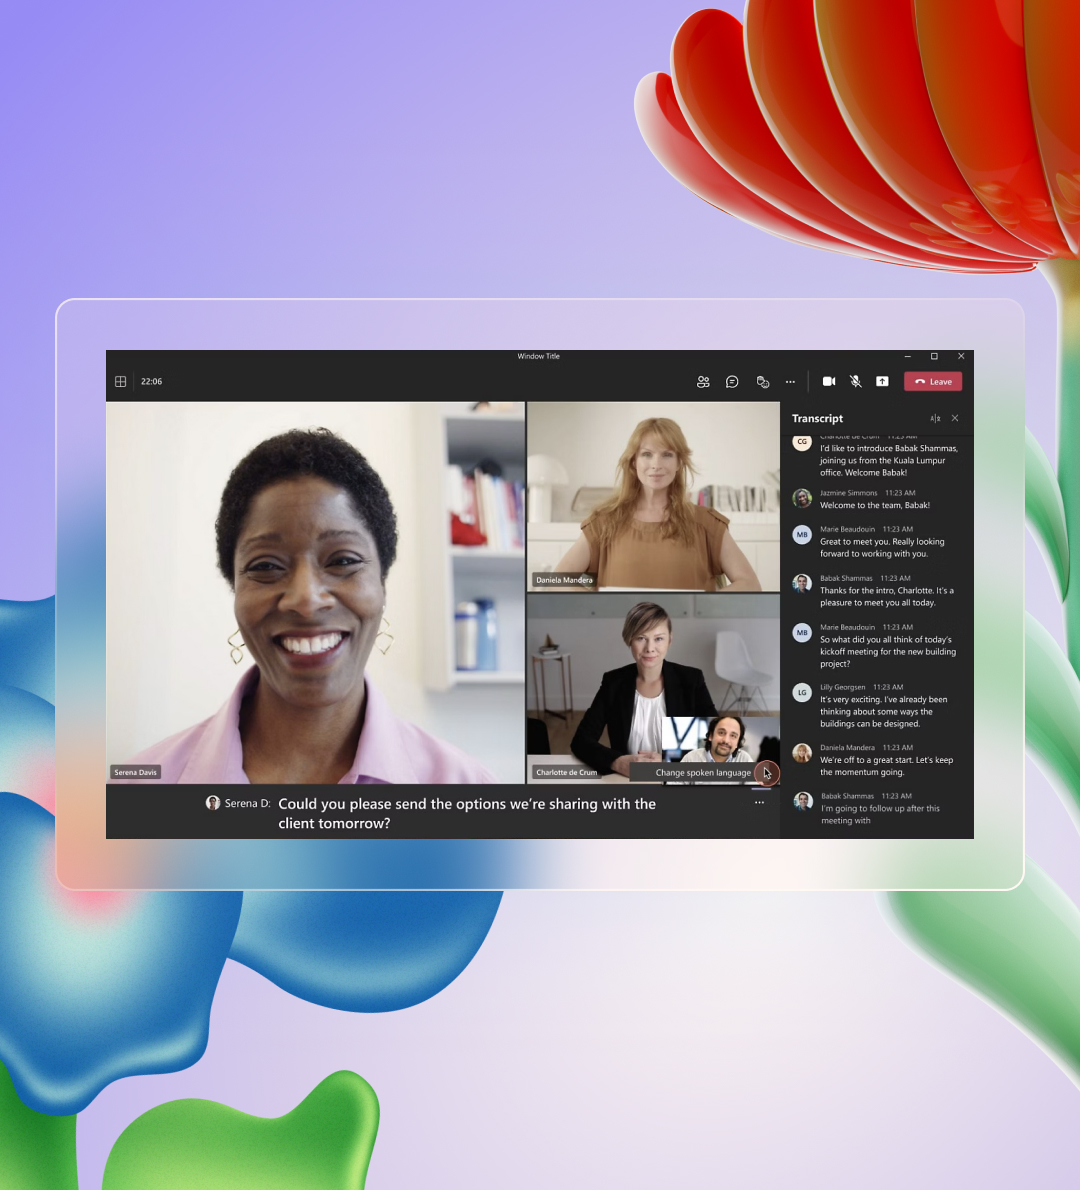 A video conference in progress on a tablet, displaying a smiling black woman in the foreground and a white woman in another window with a chat sidebar.